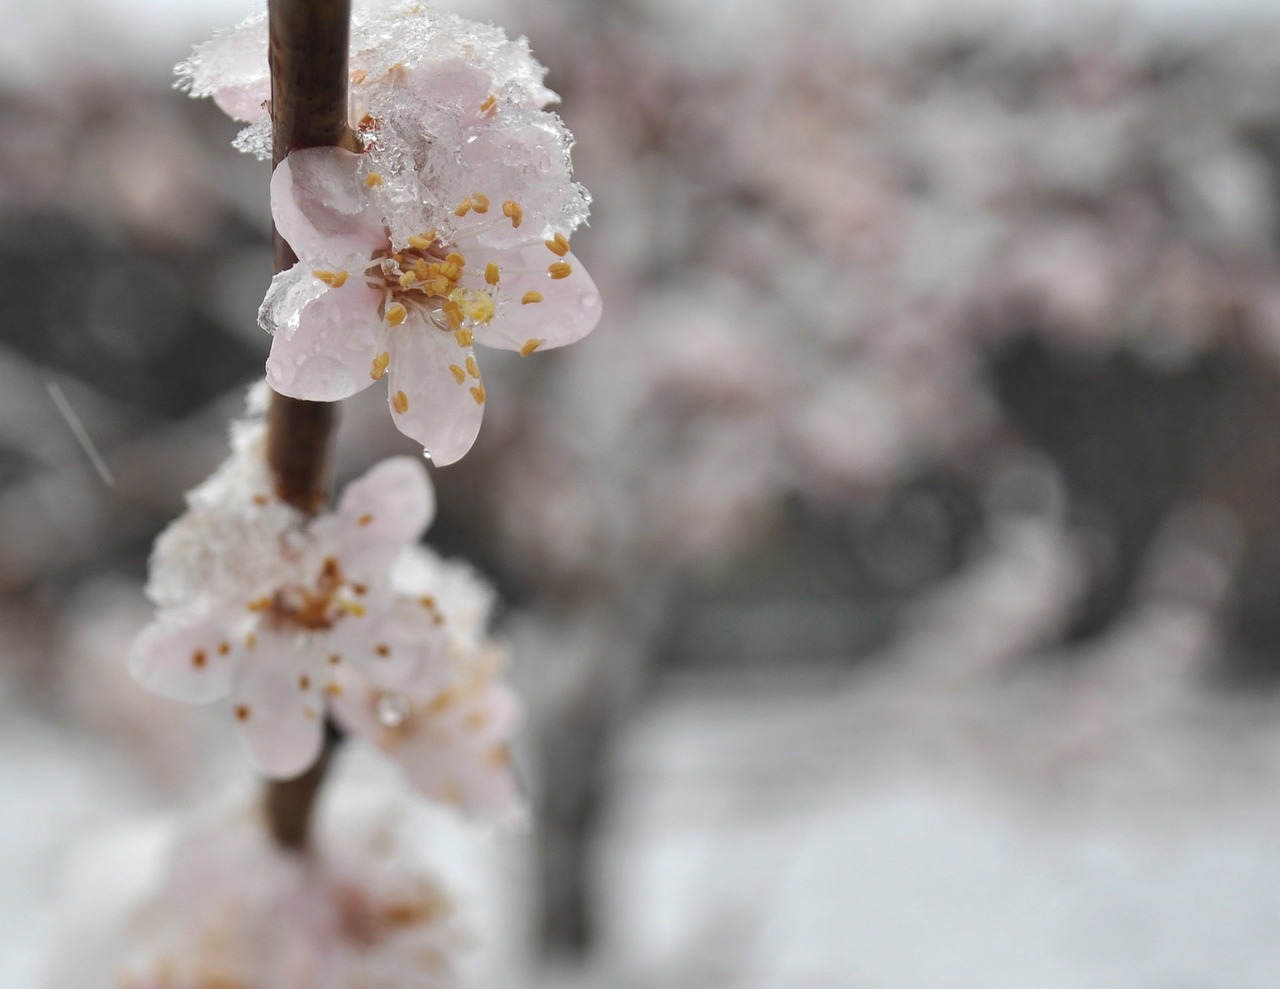 apricot flowers bloom free photo